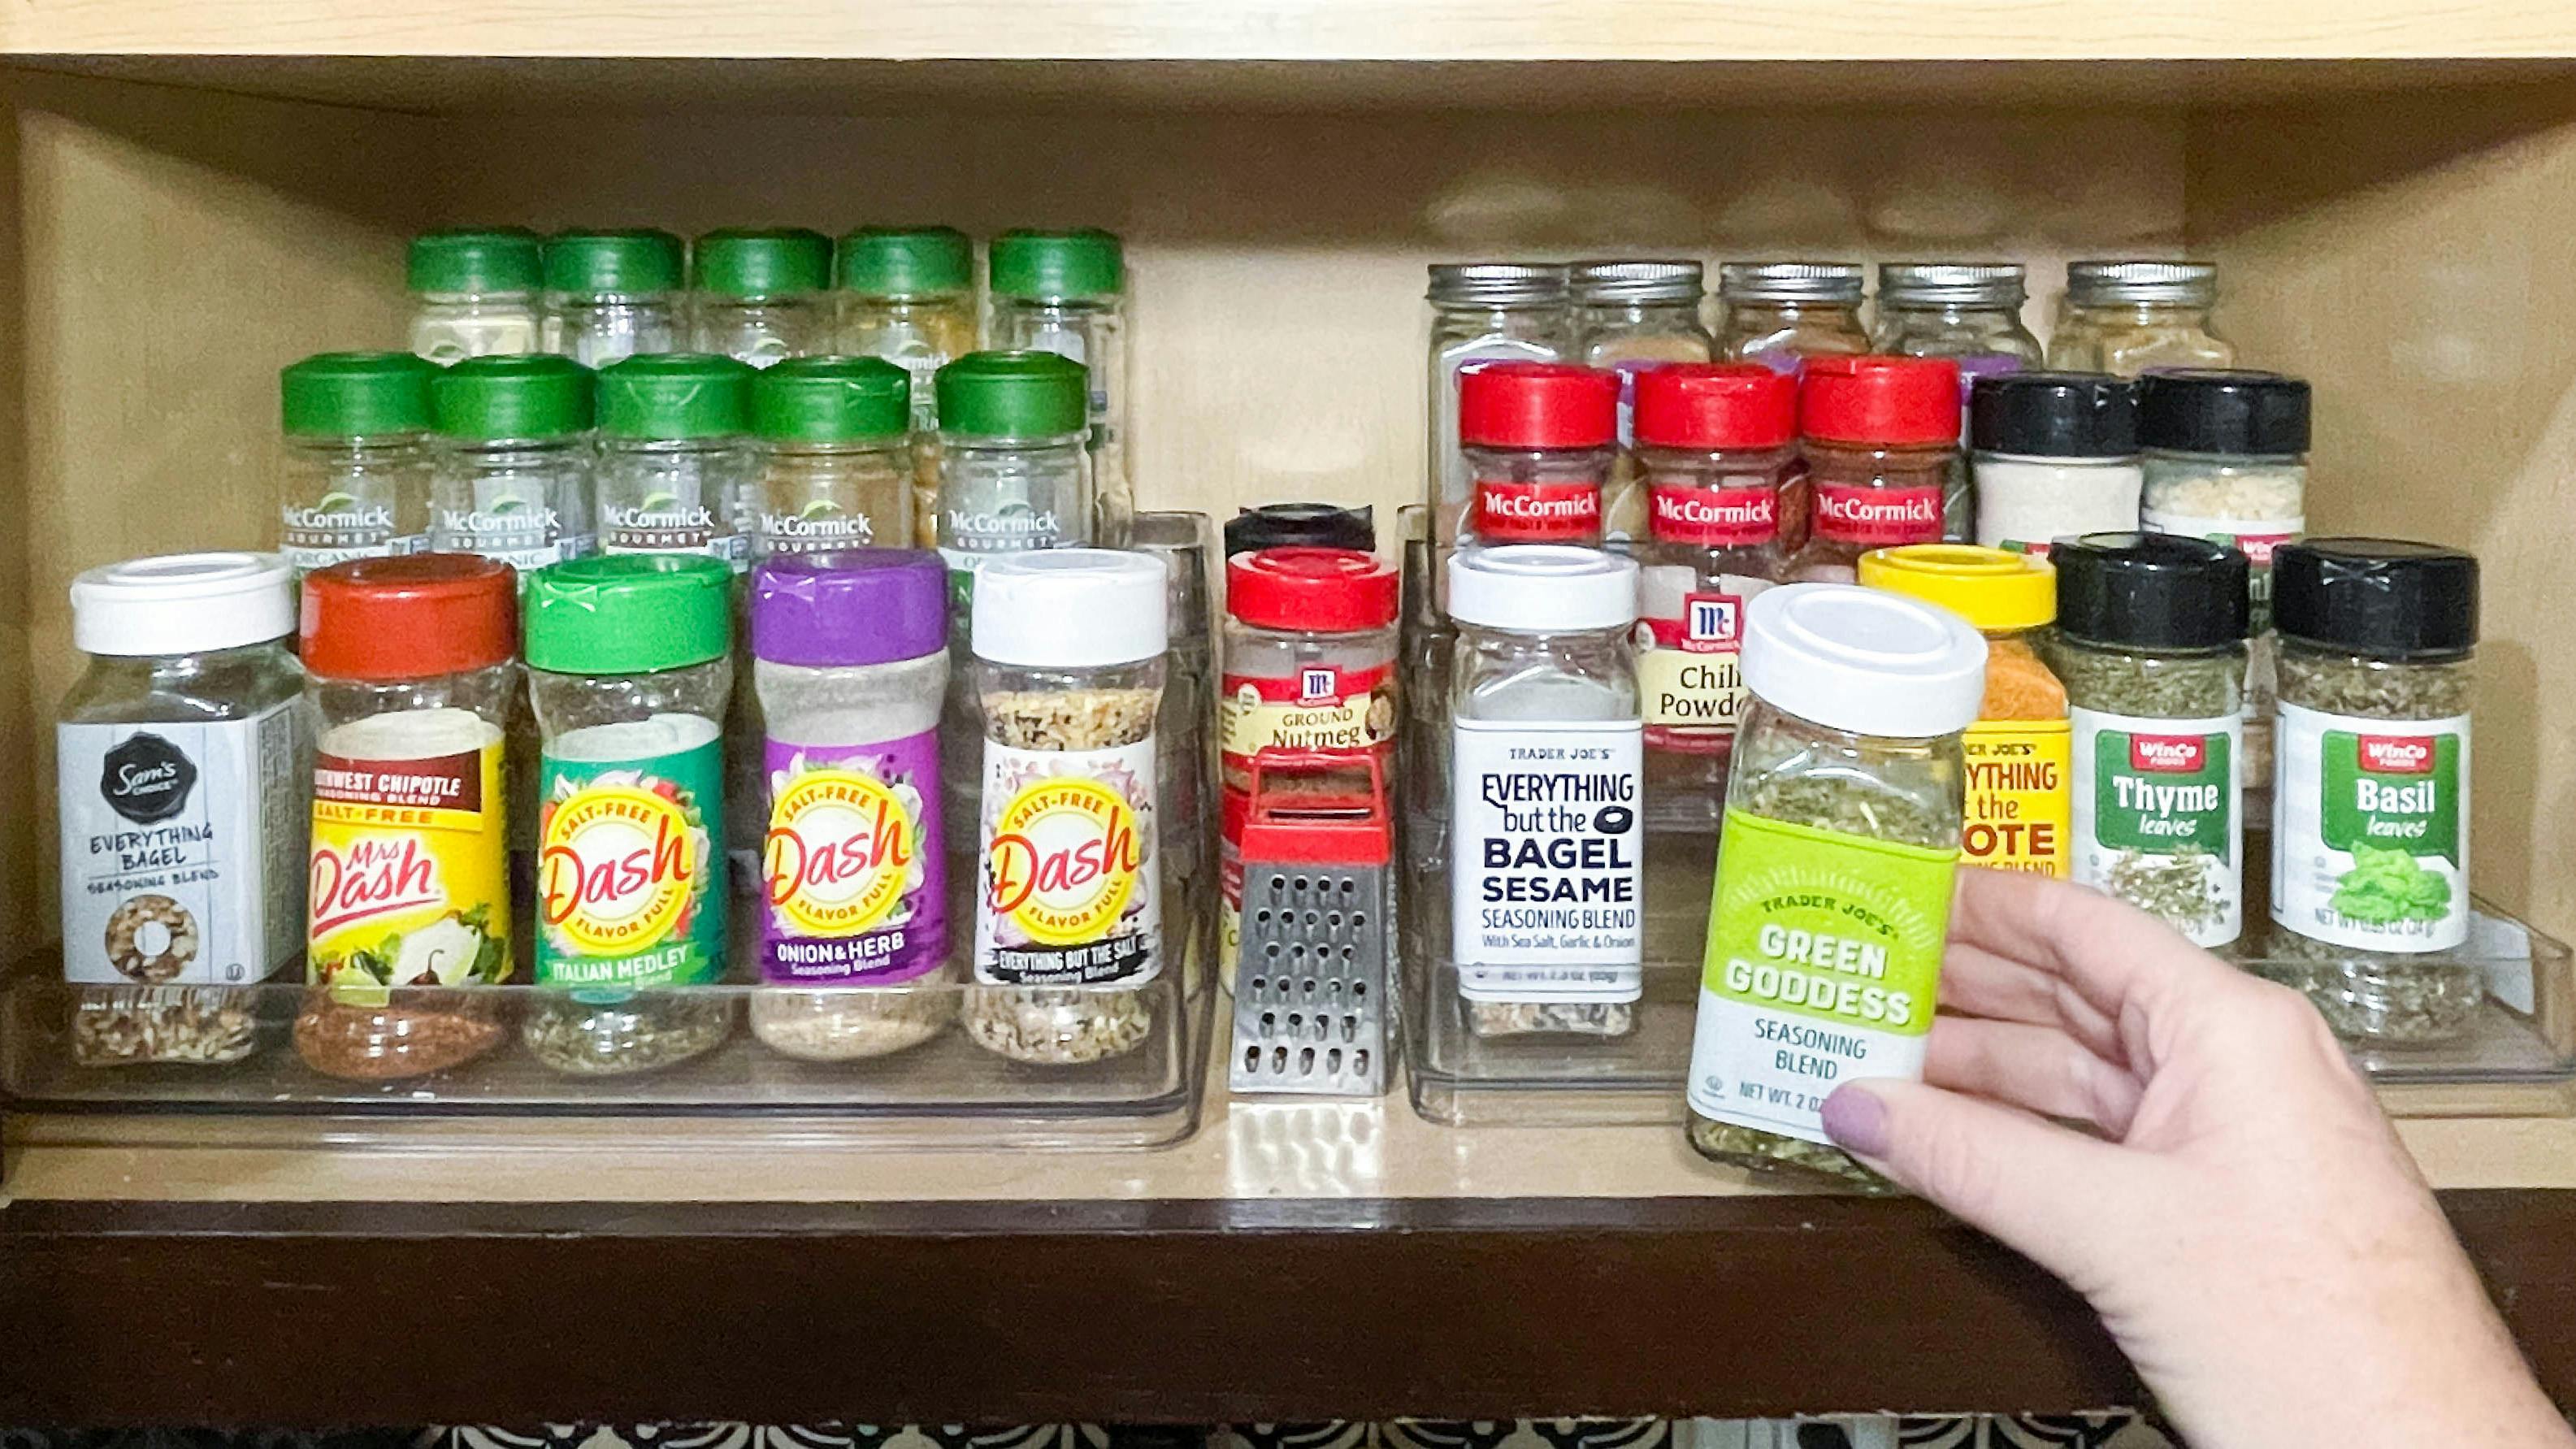 Spice Rack Organizer, Wood Seasoning Rack, Space Saving Condiment Holder, Spice  Rack Organizer For Folding Countertops And Cabinet Drawers, Bamboo Display  Shelf, Seasoning Organizer For Jars Spice, Home Countertop Rack, Kitchen  Stuff, 